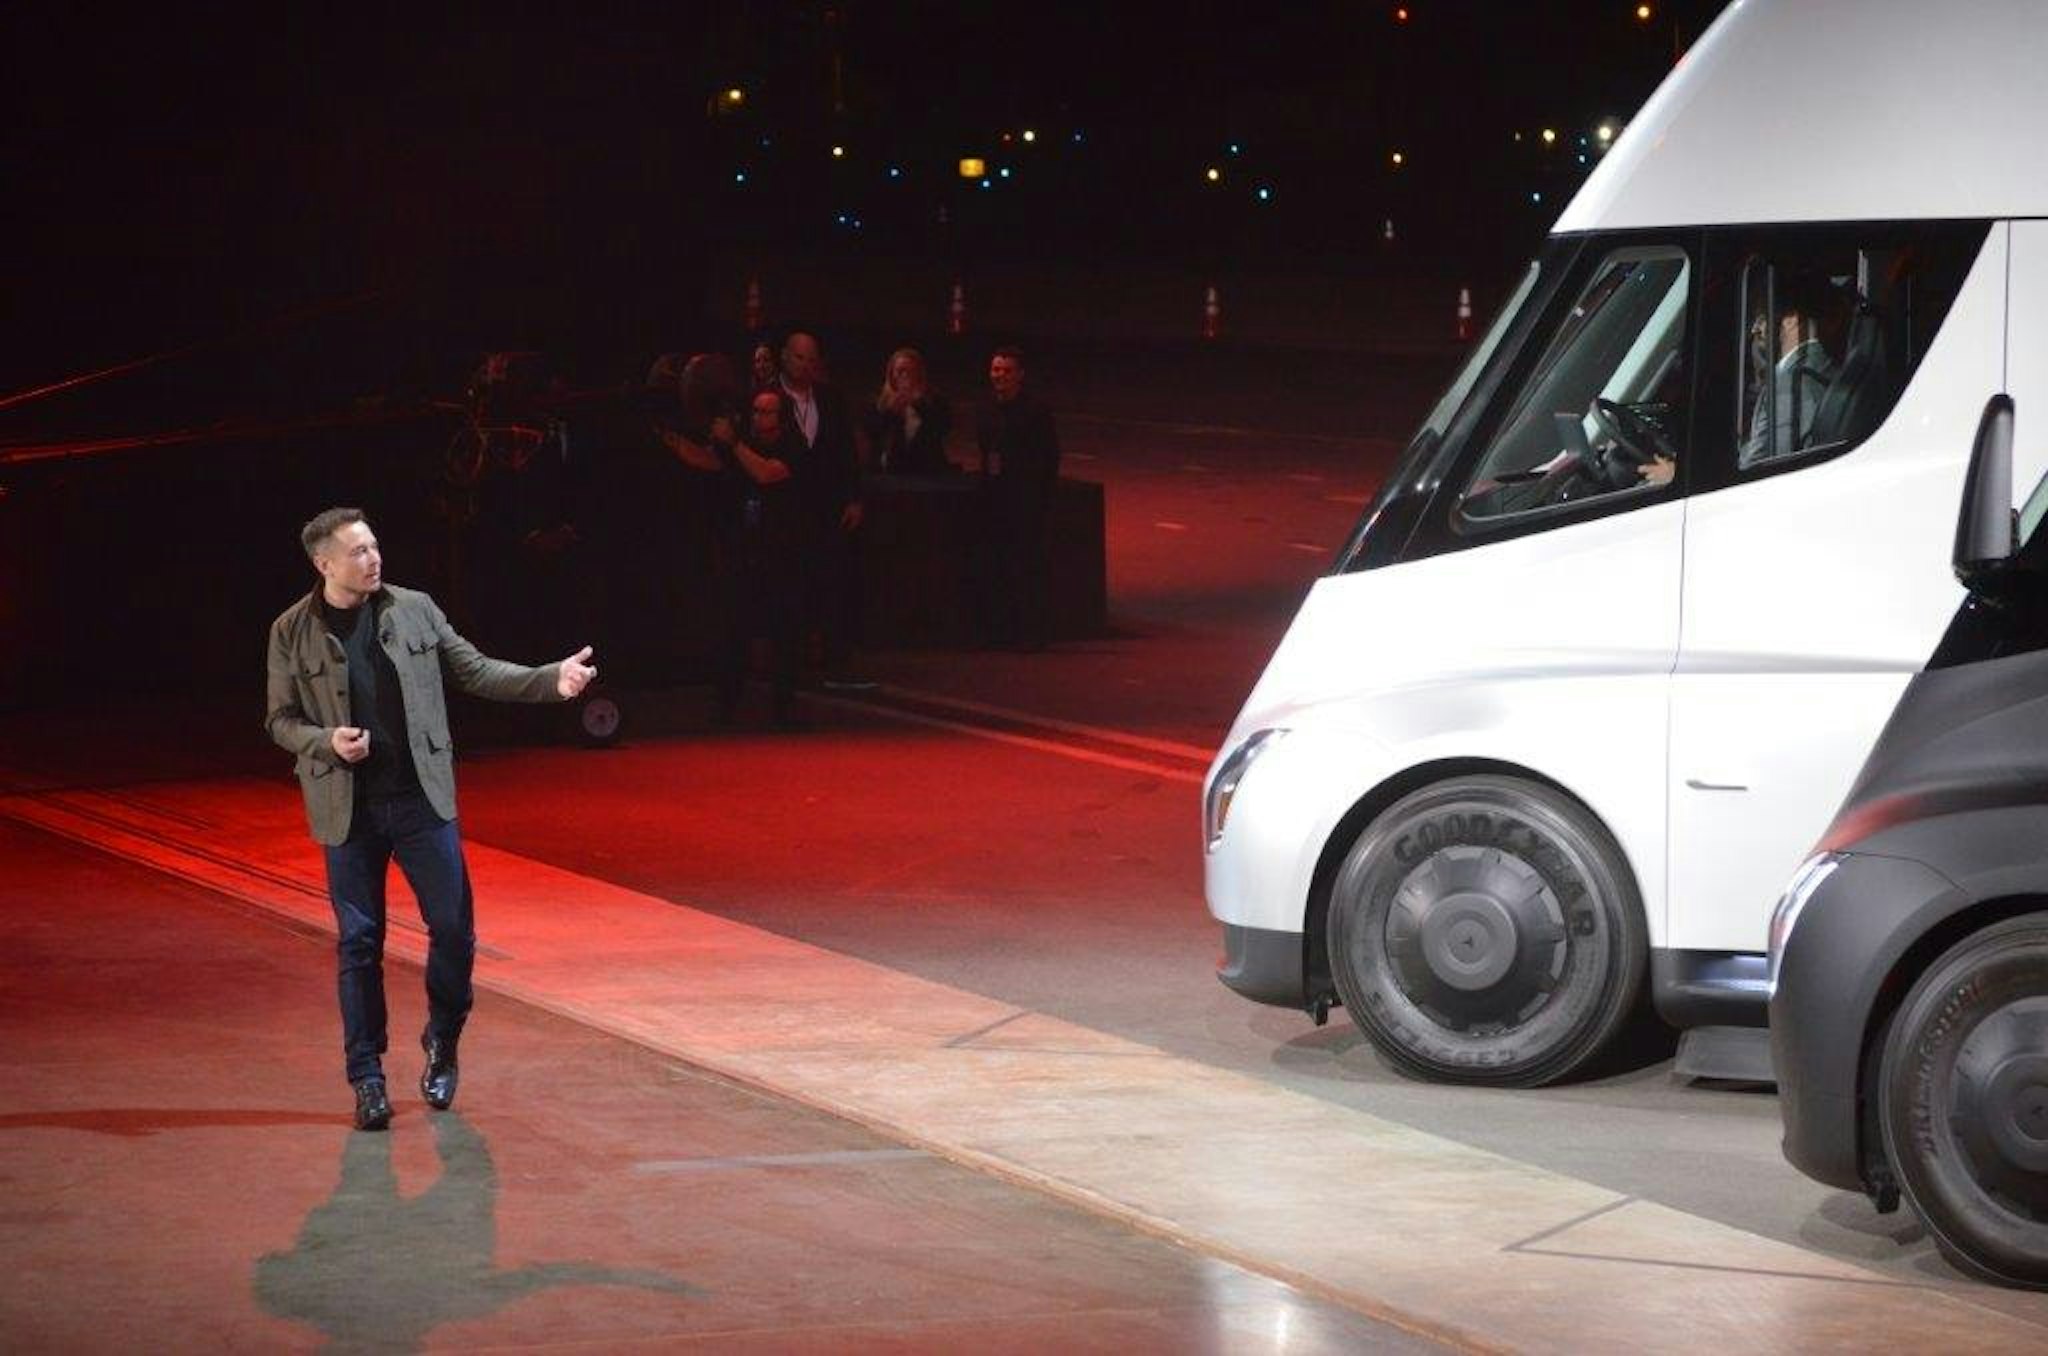 Tesla Chairman and CEO Elon Musk unveils the new "Semi" electric Truck to buyers and journalists on November 16, 2017 in Hawthorne, California, near Los Angeles. / AFP PHOTO / Veronique DUPONT (Photo credit should read